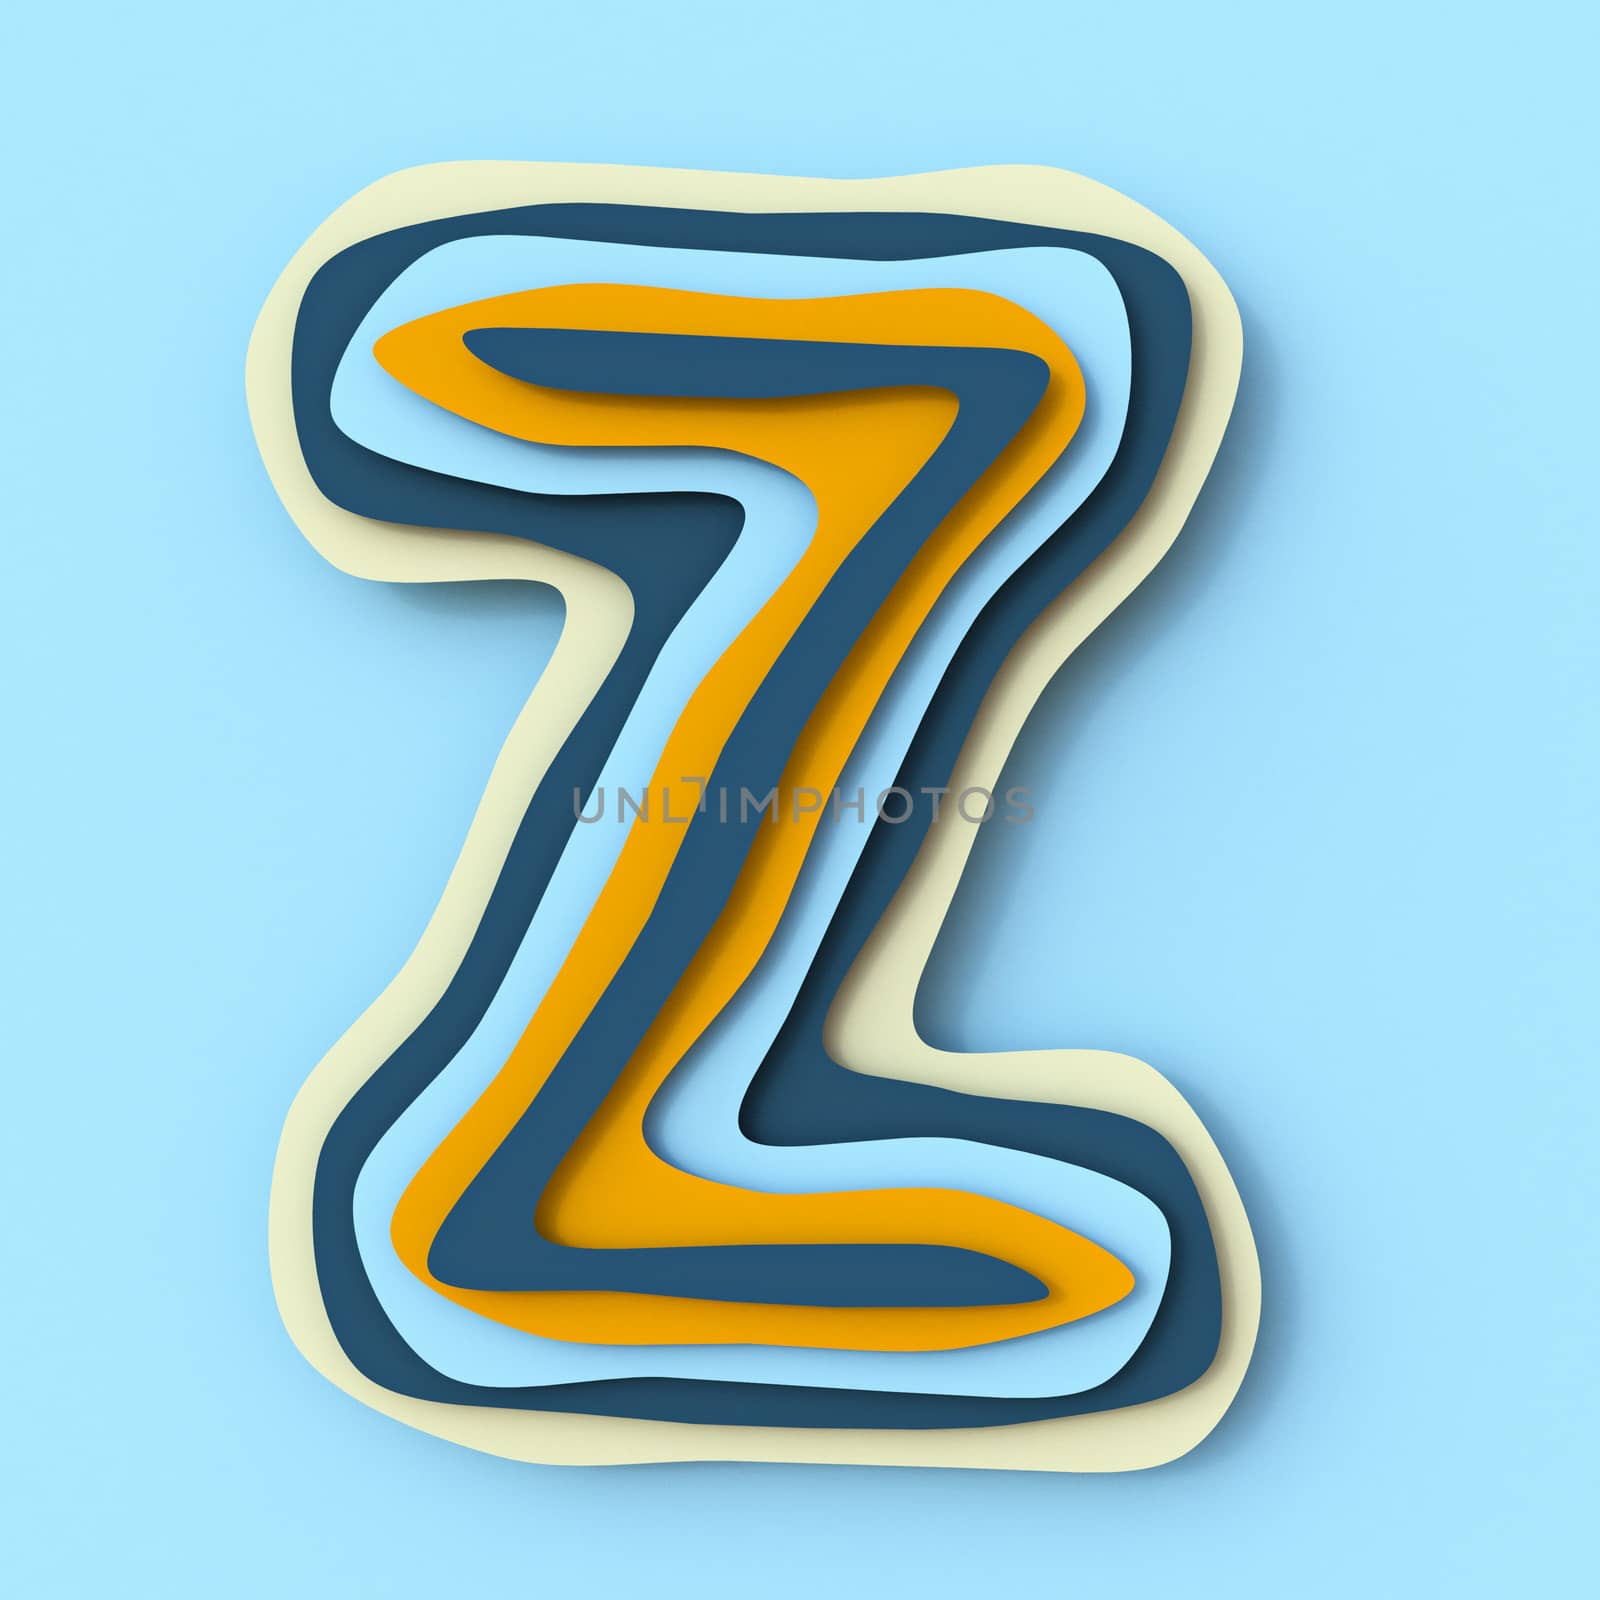 Colorful paper layers font Letter Z 3D render illustration isolated on blue background